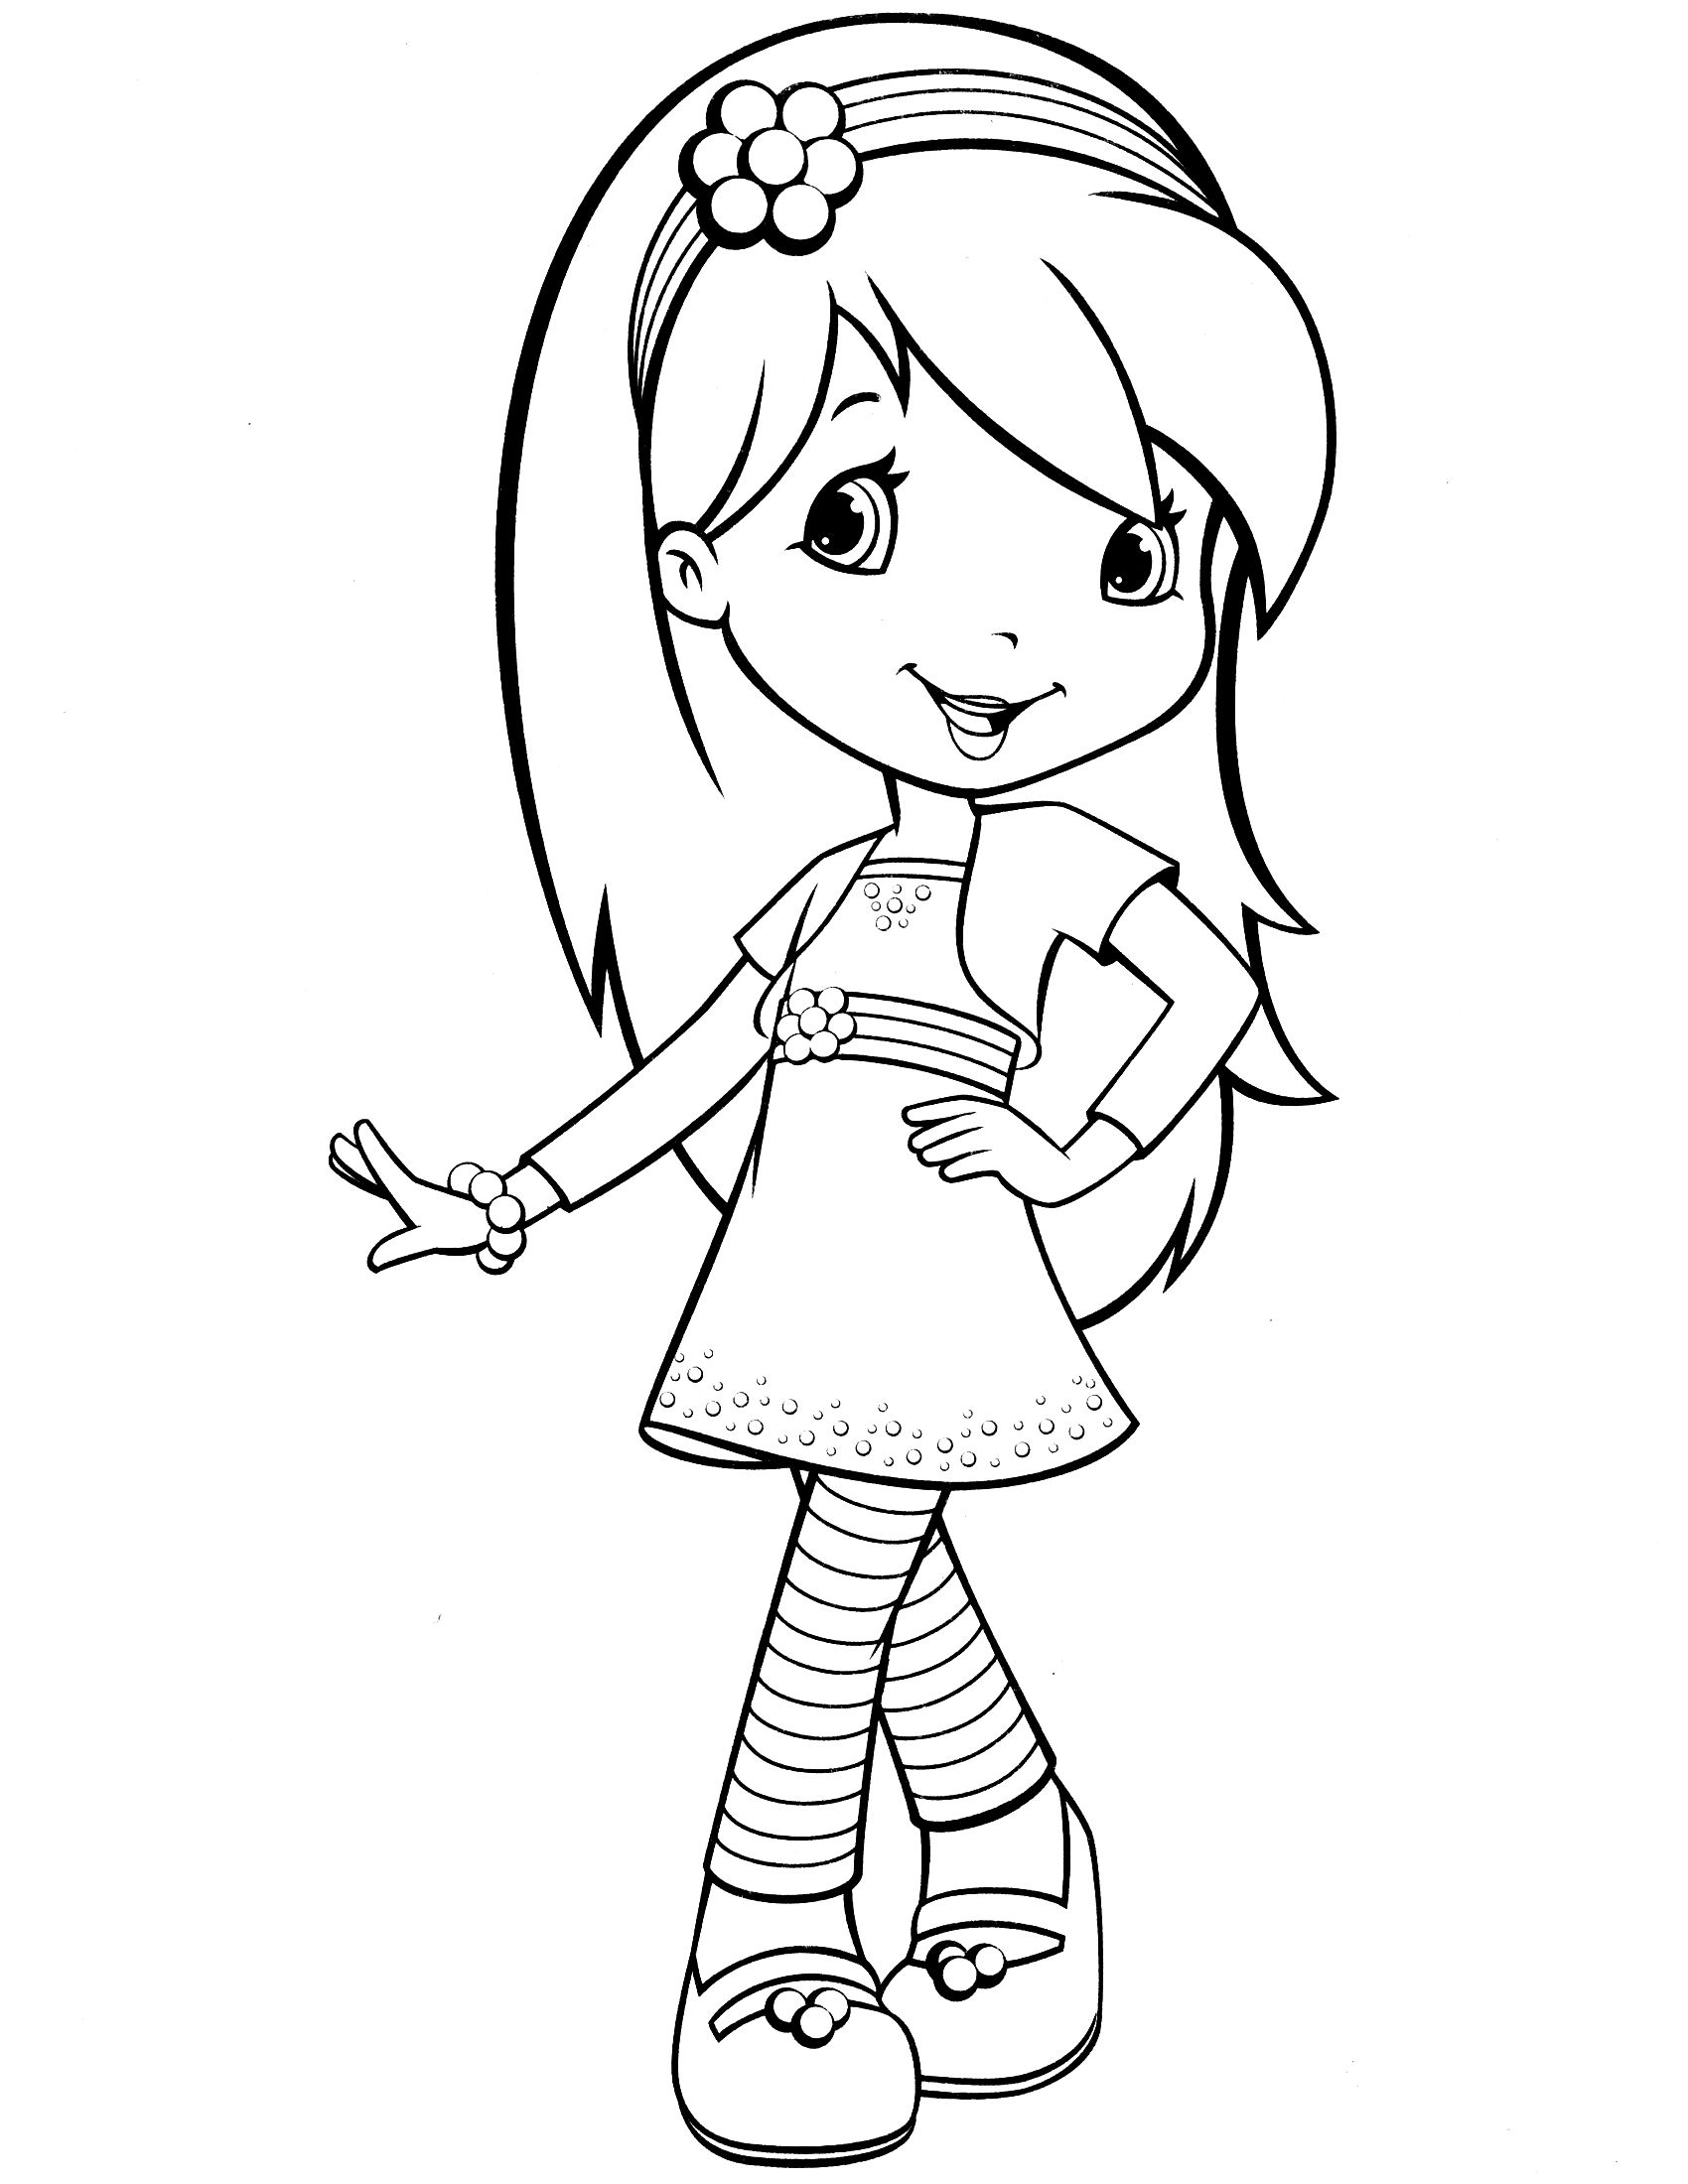 strawberry shortcake characters coloring pages strawberry shortcake coloring pages fantasy coloring pages characters strawberry pages coloring shortcake 